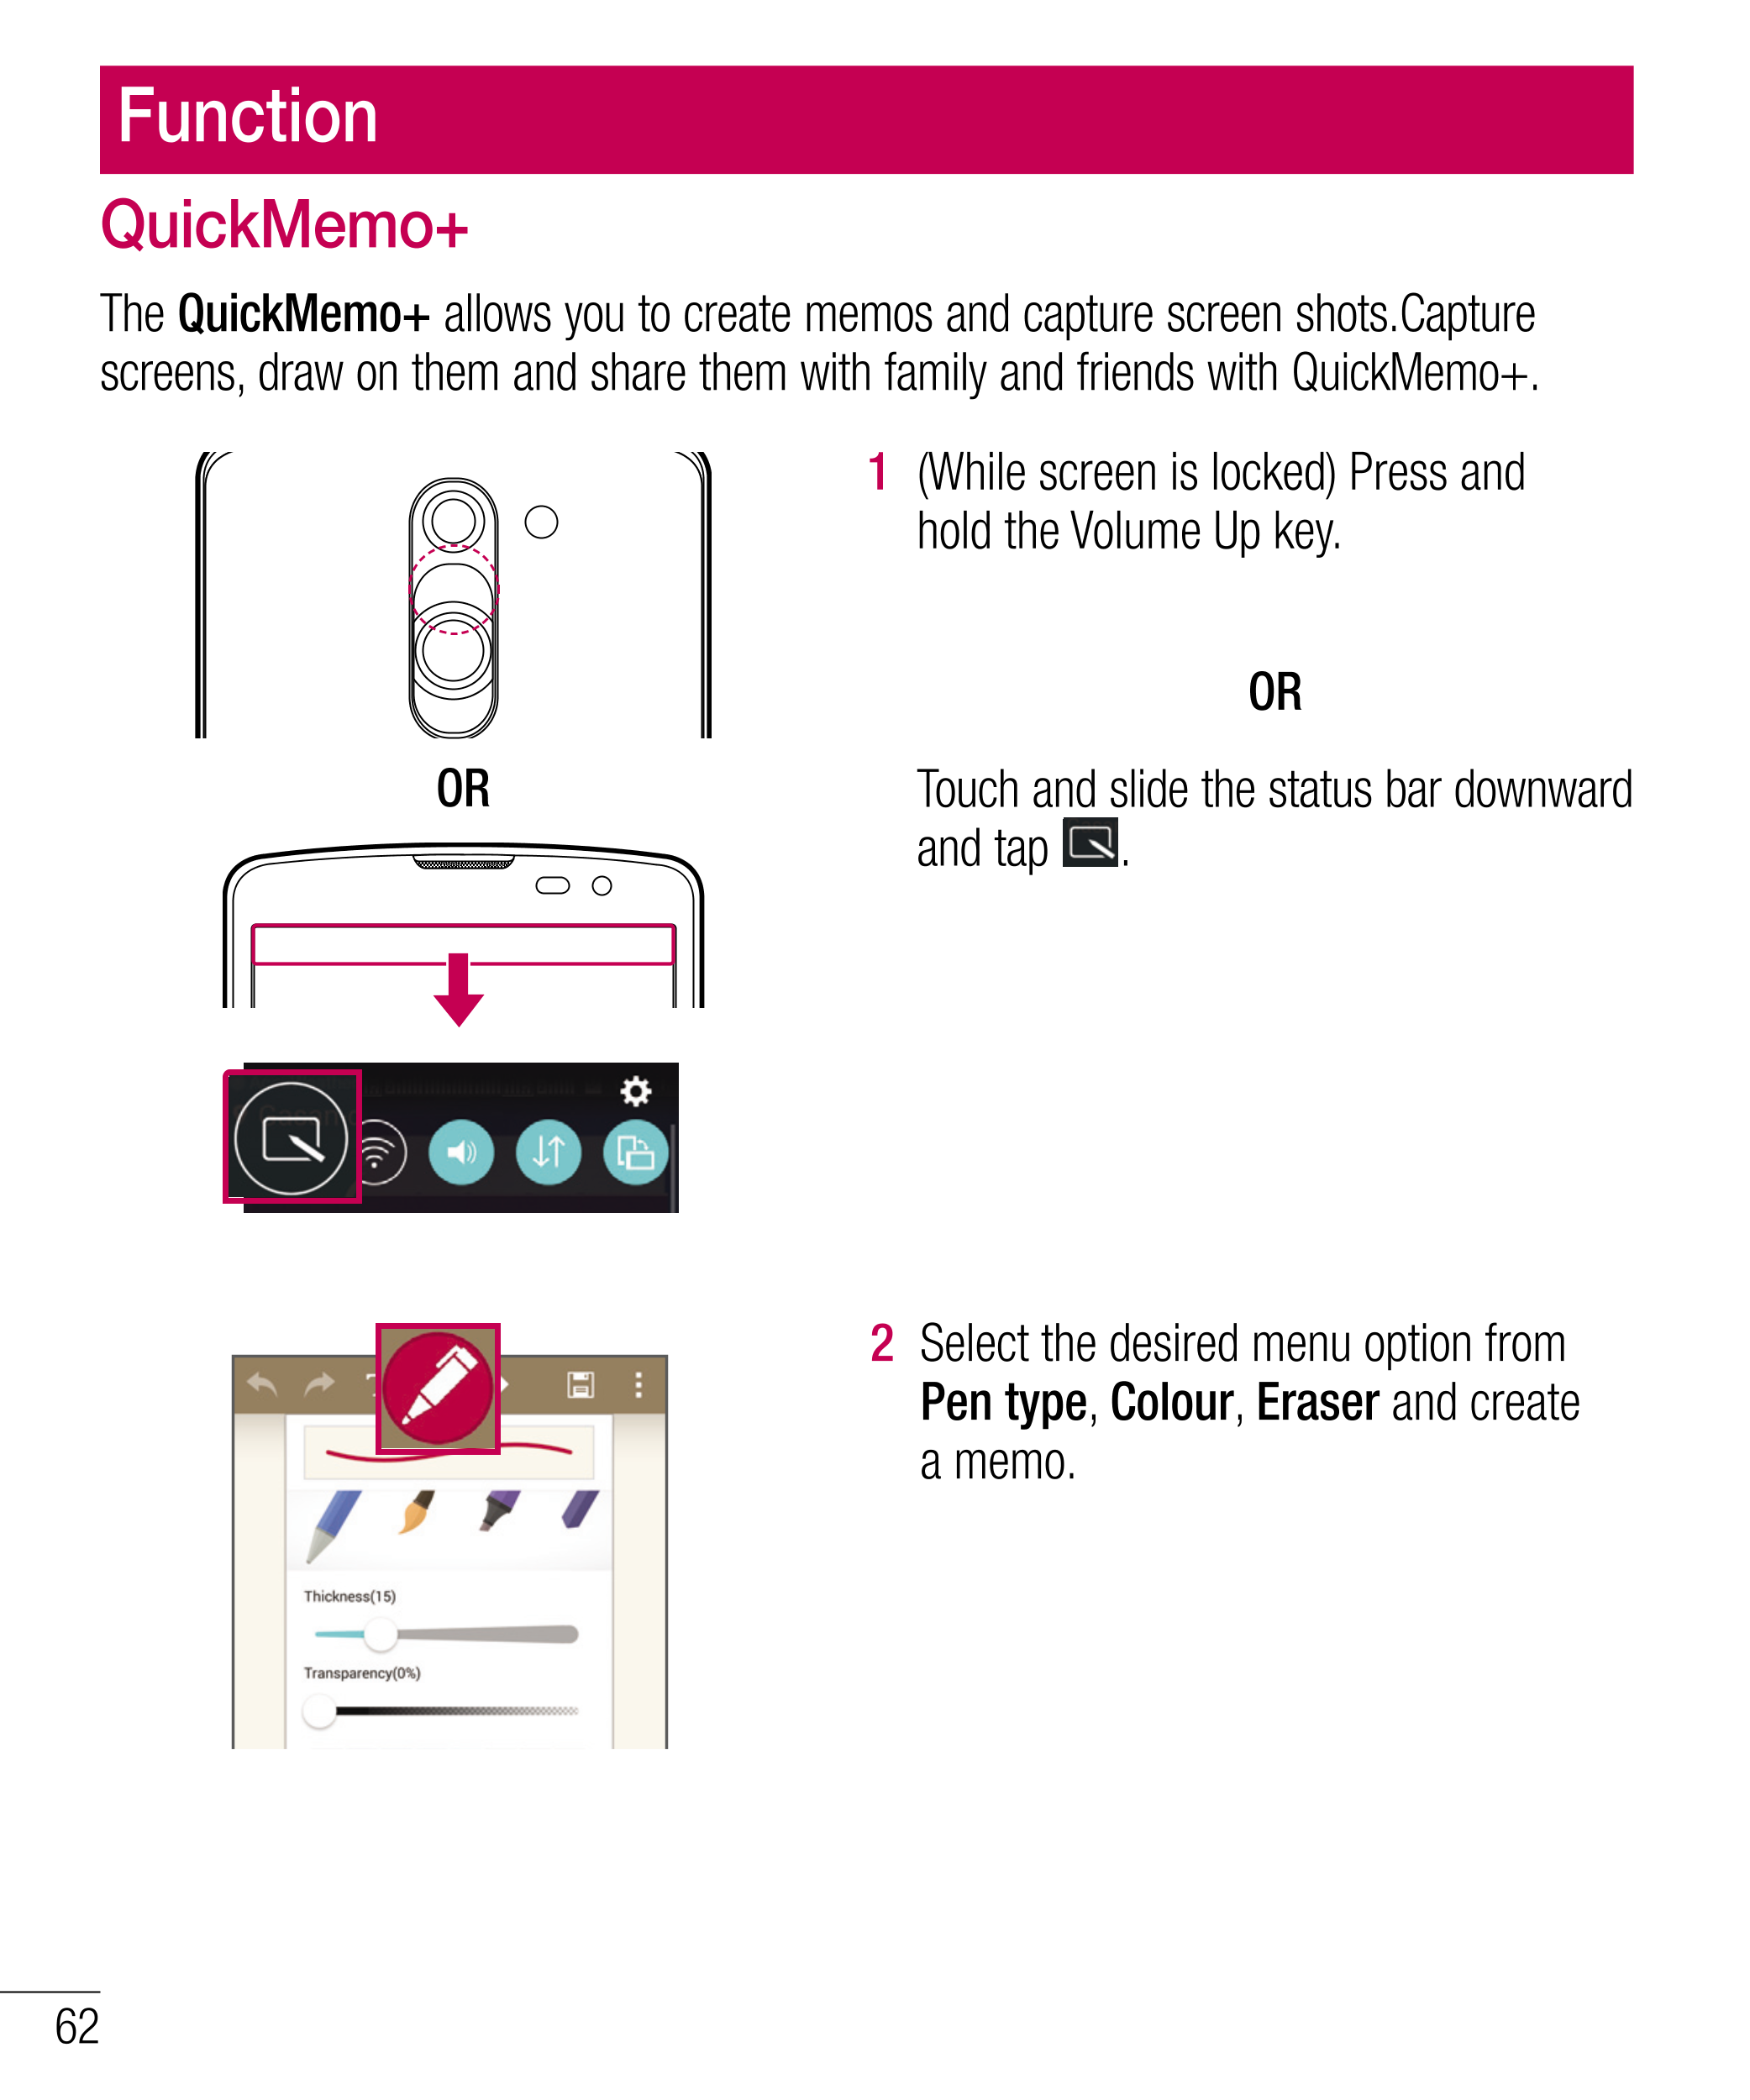 Function
QuickMemo+
The  QuickMemo+ allows you to create memos and capture screen shots.Capture 
screens, draw on them and share